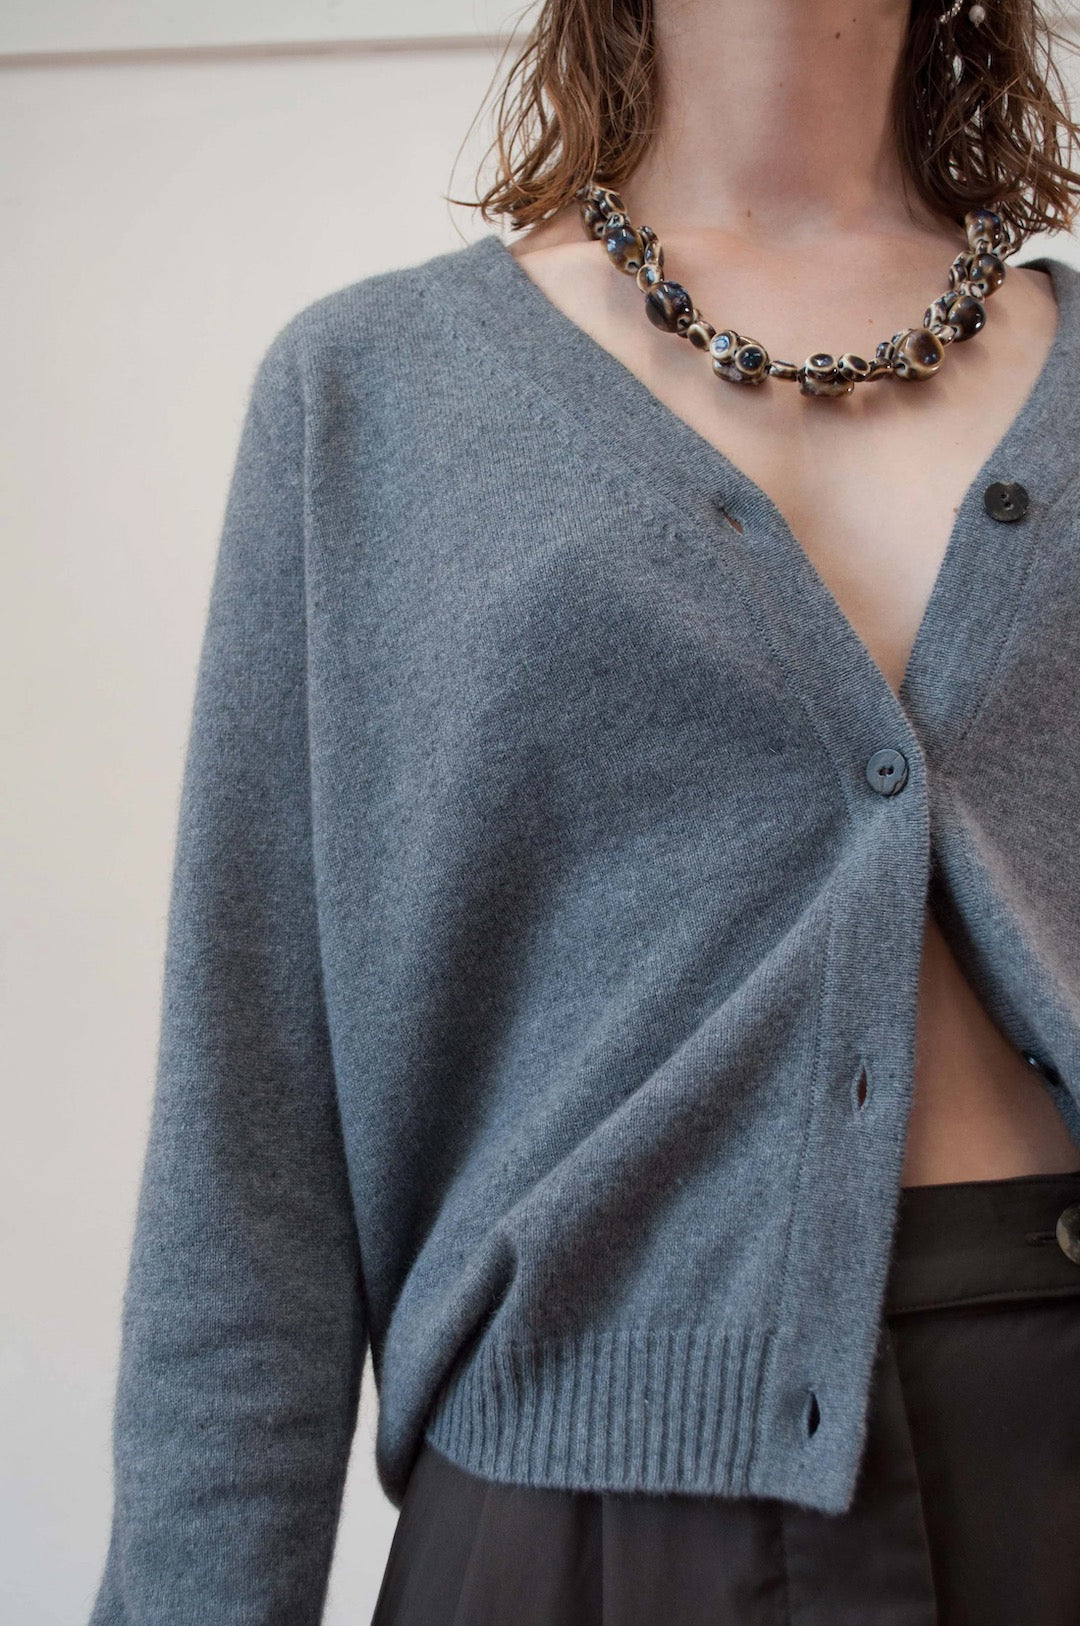 A woman wearing a Kom Cardigan – Stone by OVNA OVICH and necklace.